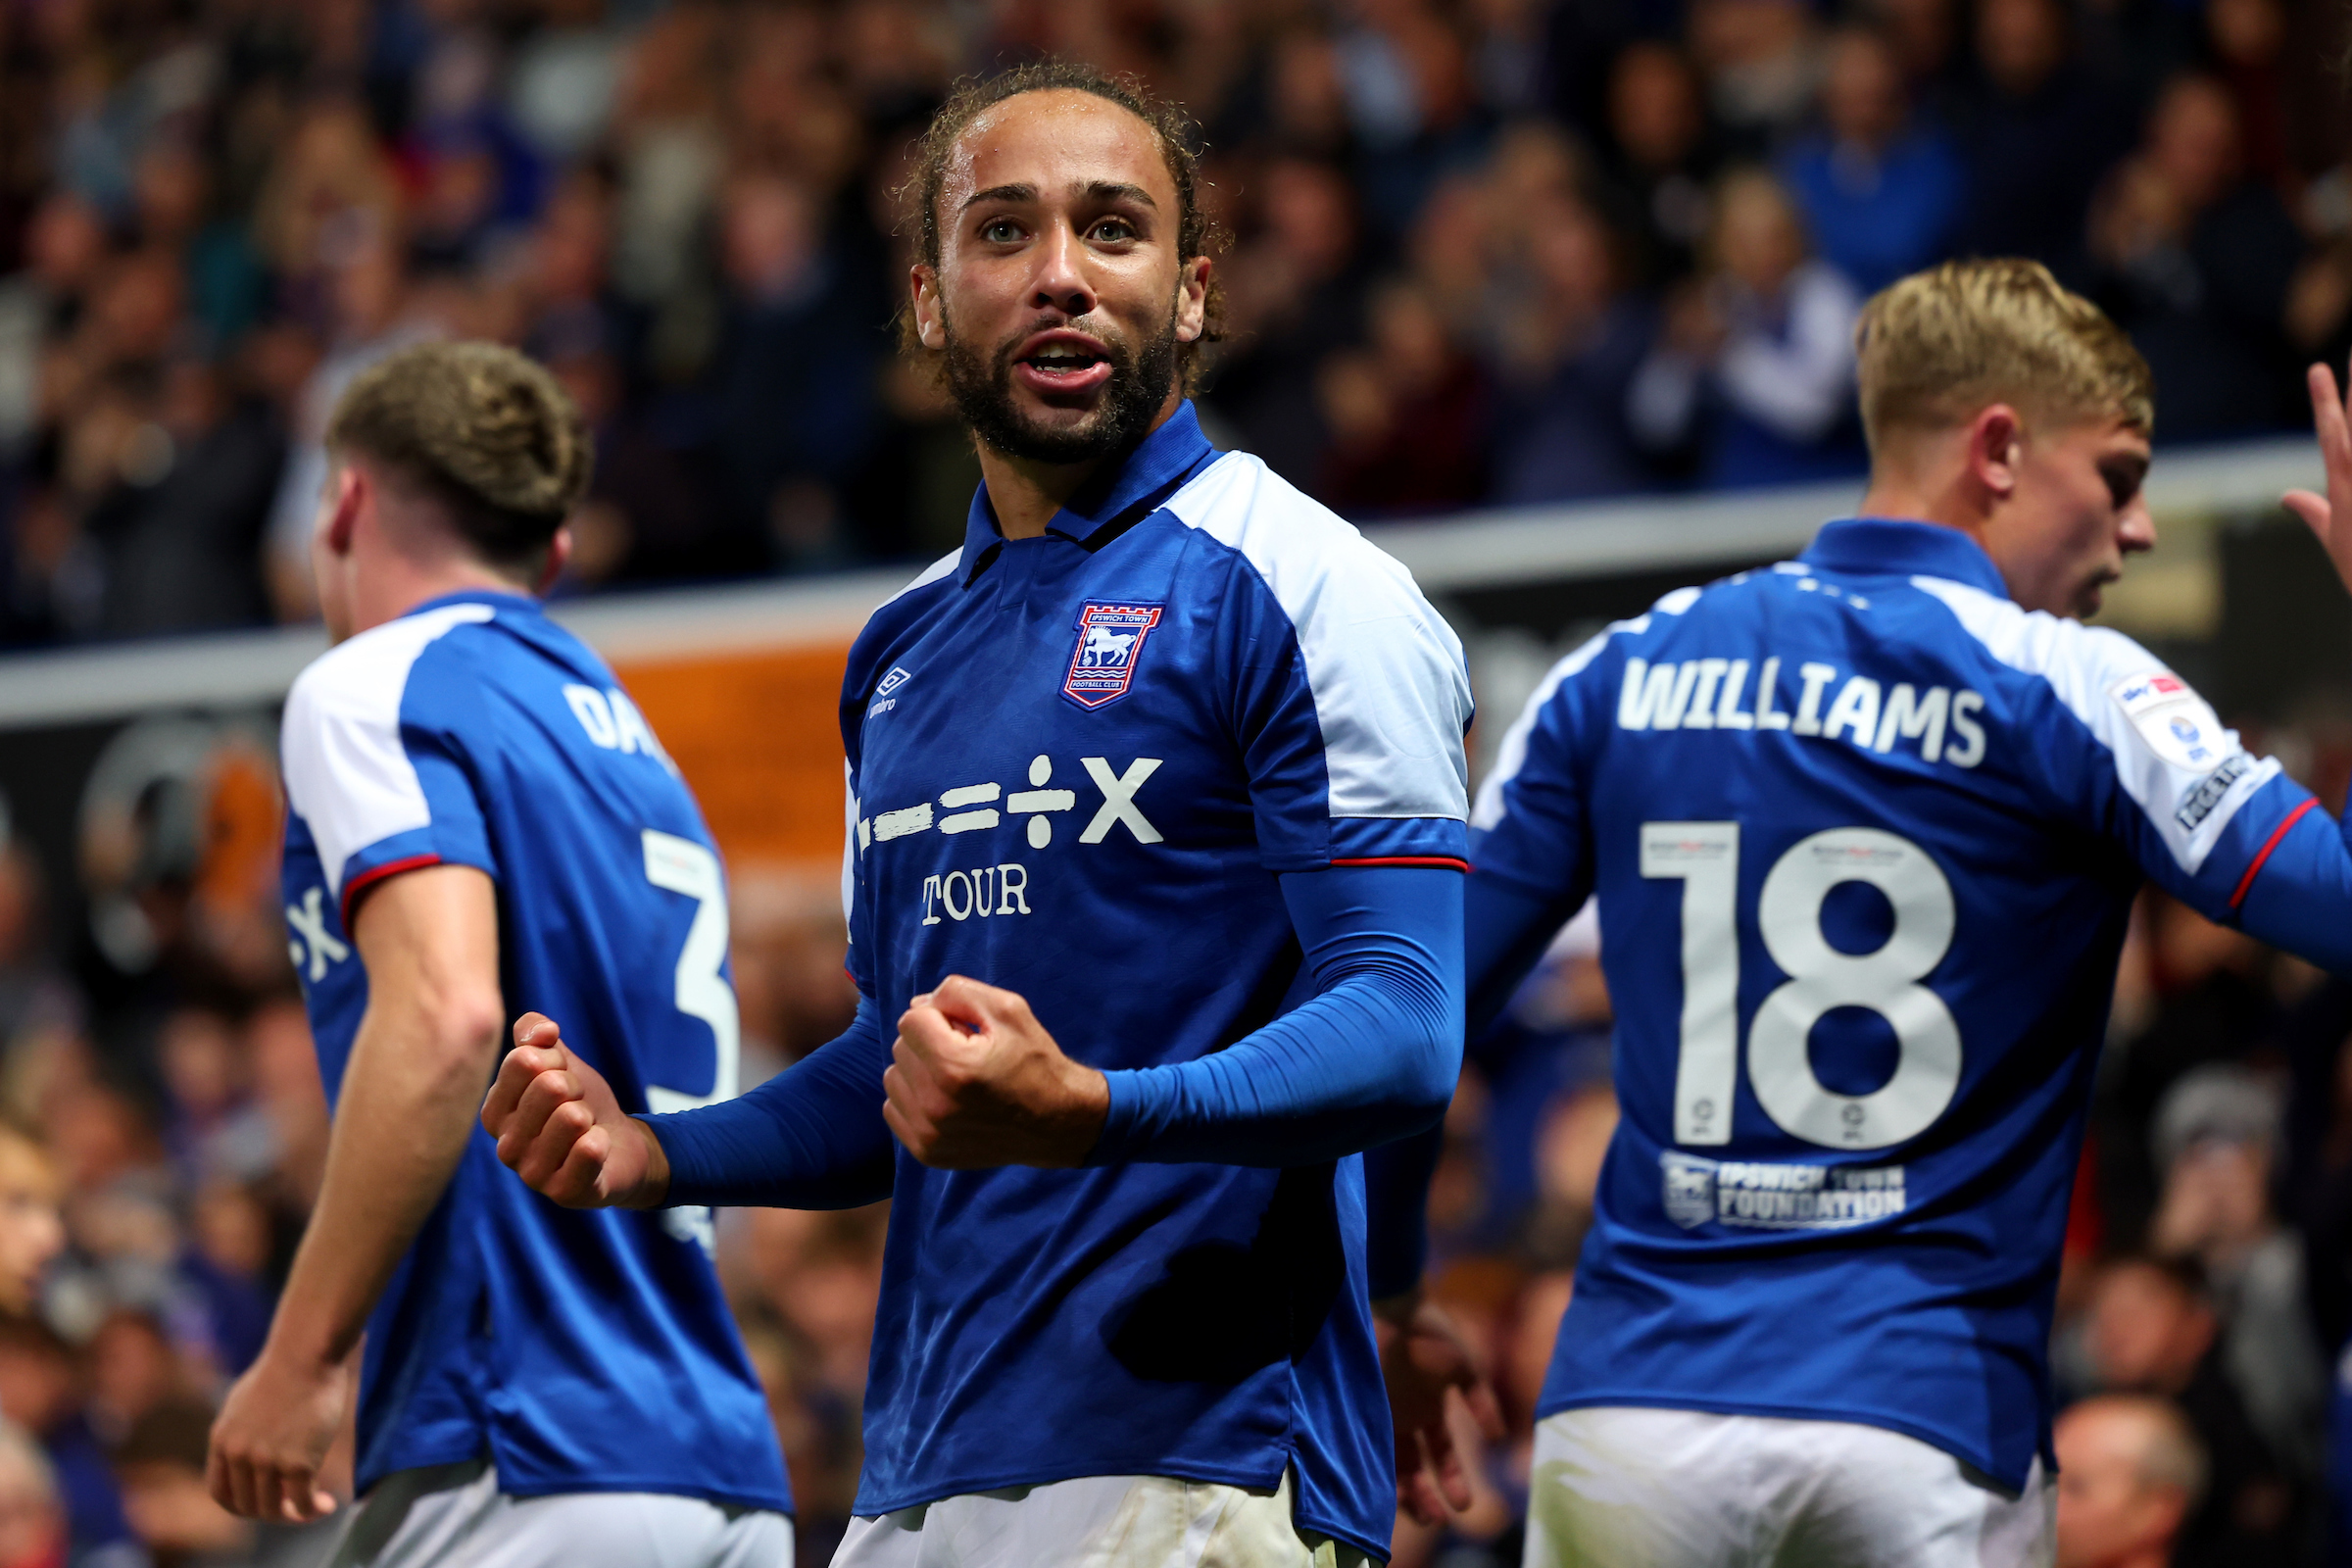 According to BBC reprot: Ipswich Town incredible player is on the their terrific turnaround…